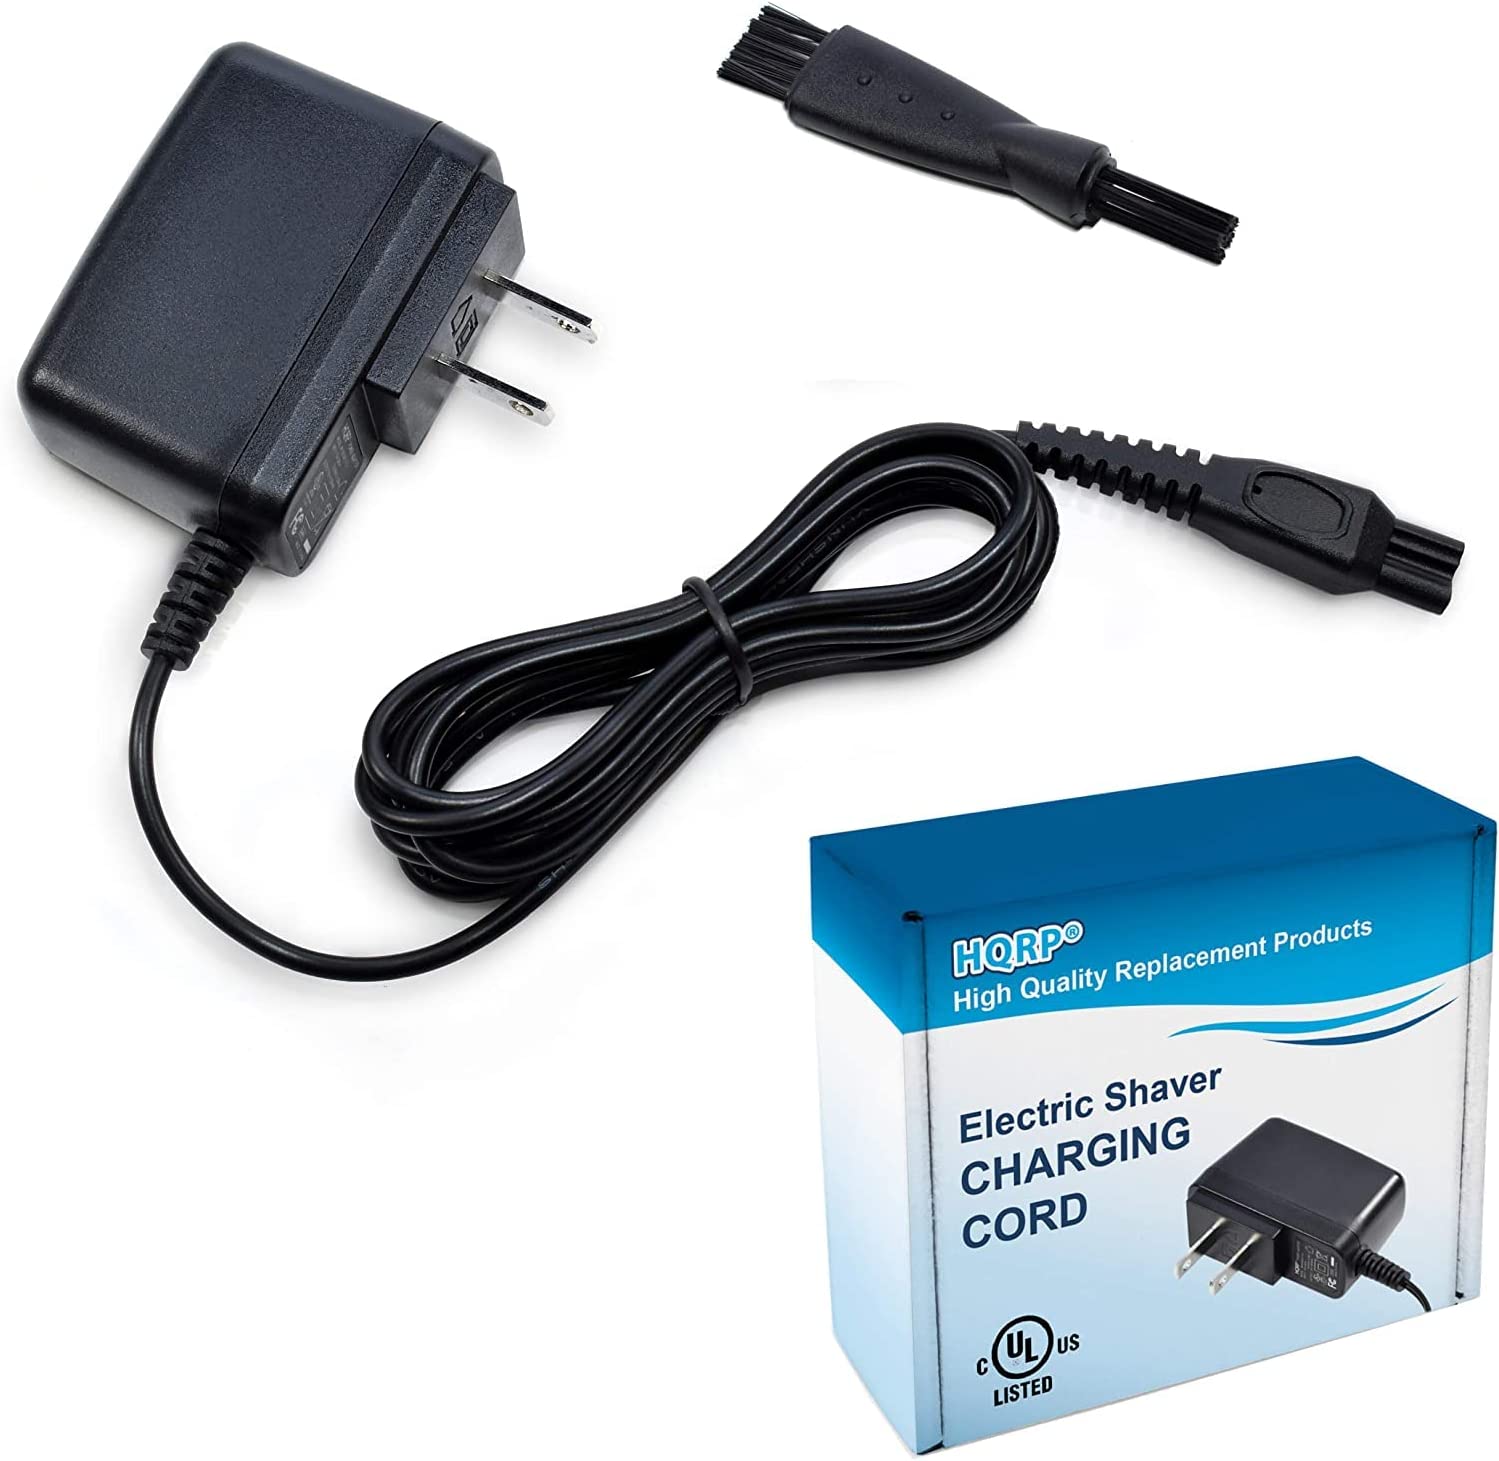 HQRP AC Adapter / Power Cord compatible with Philips Norelco 7737X, 7745X, 7775X, 7800XL, 7800XLCC, 7810XL Razor / Shaver